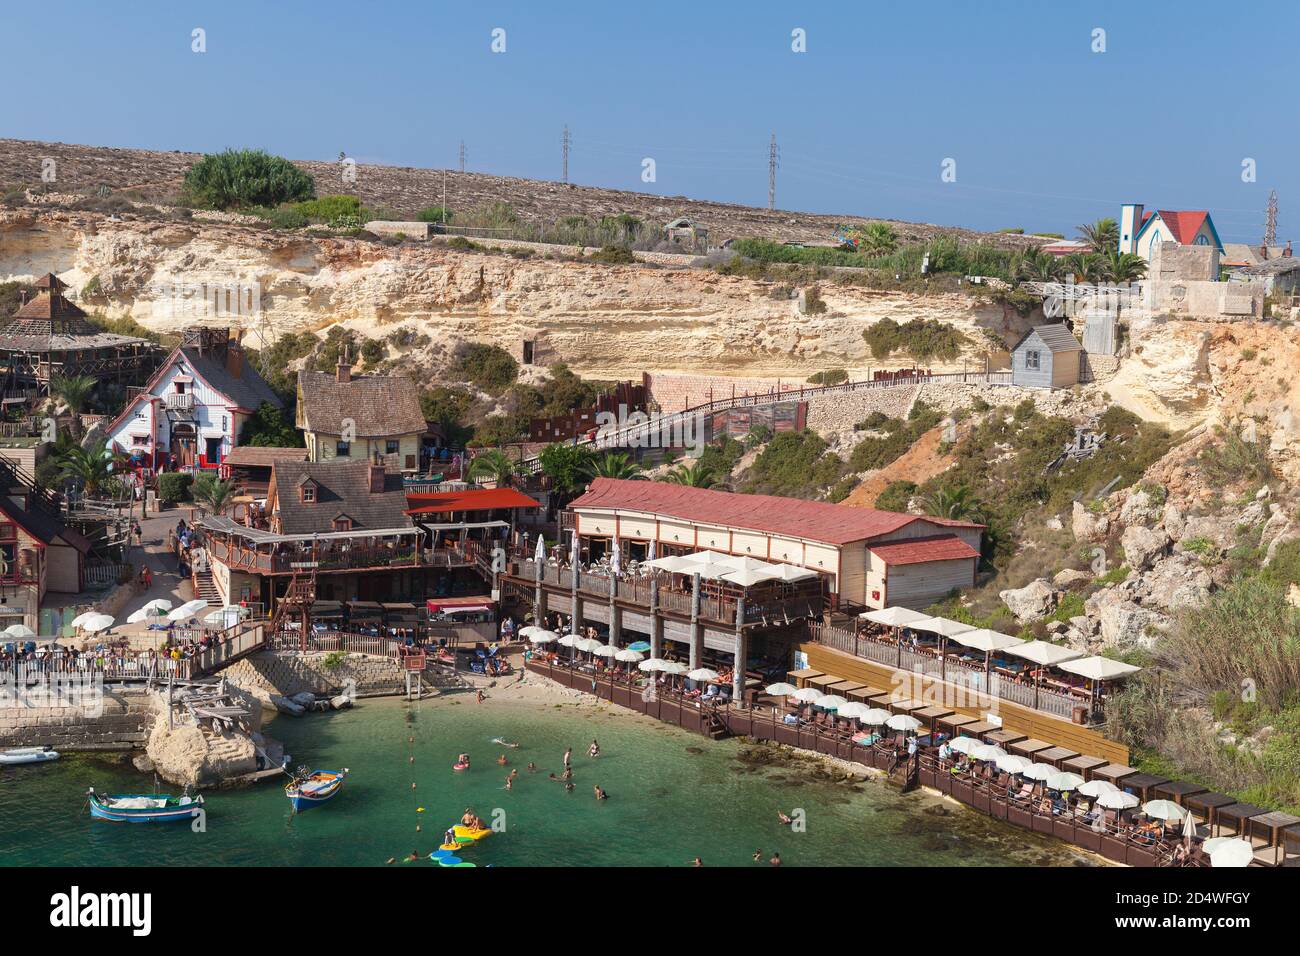 Mellieha, Malta - August 25, 2019: Coastal view of Popeye Village, also known as Sweethaven Village, purpose-built film set village that has been conv Stock Photo